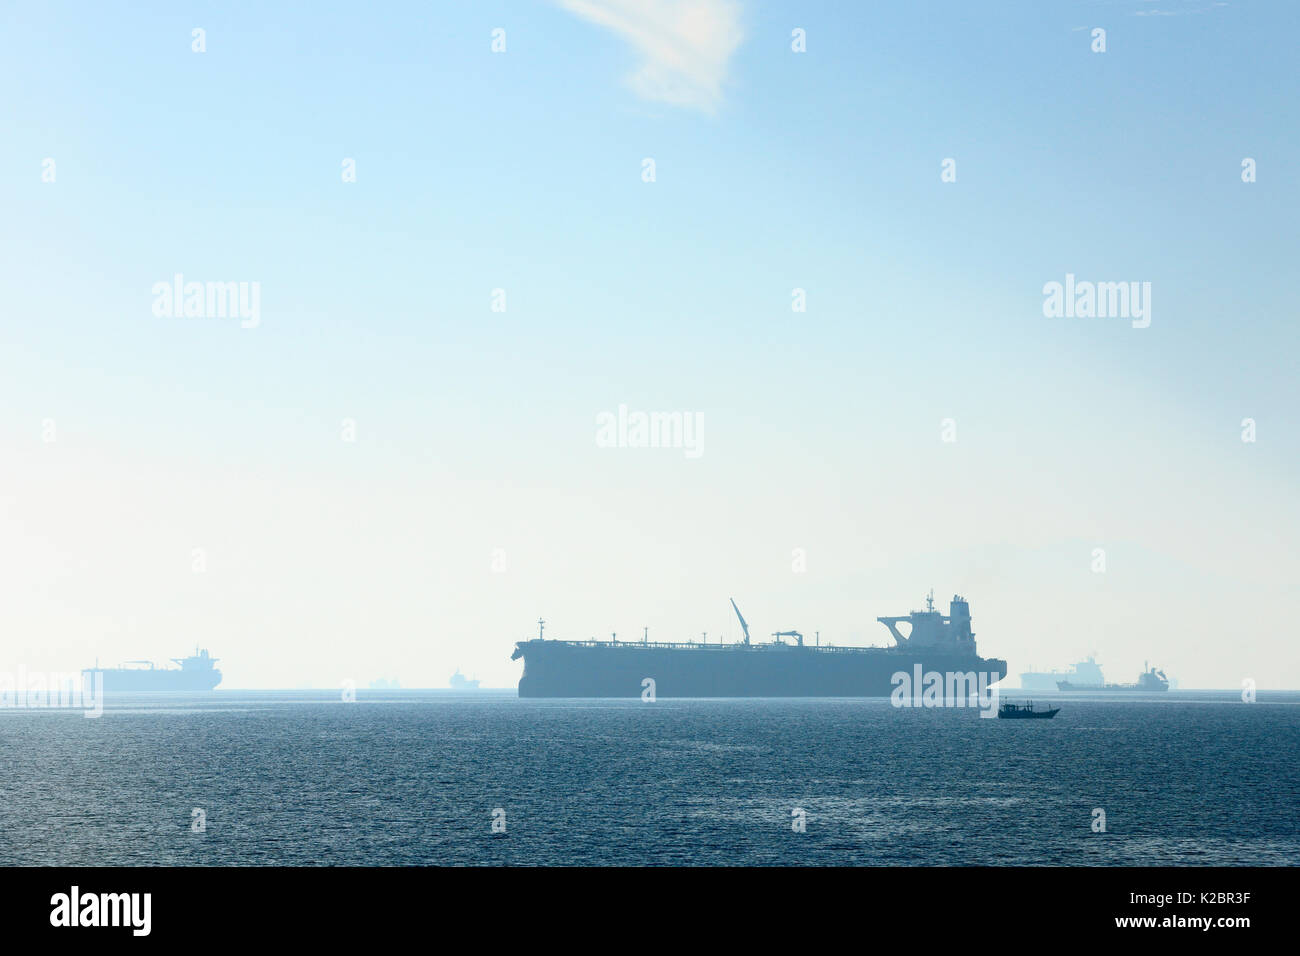 Oil tankers in the Gulf of Oman, seen from the Ferry Musandam to Shinas (Oman), United Arab Emirates. All non-editorial uses must be cleared individually. Stock Photo